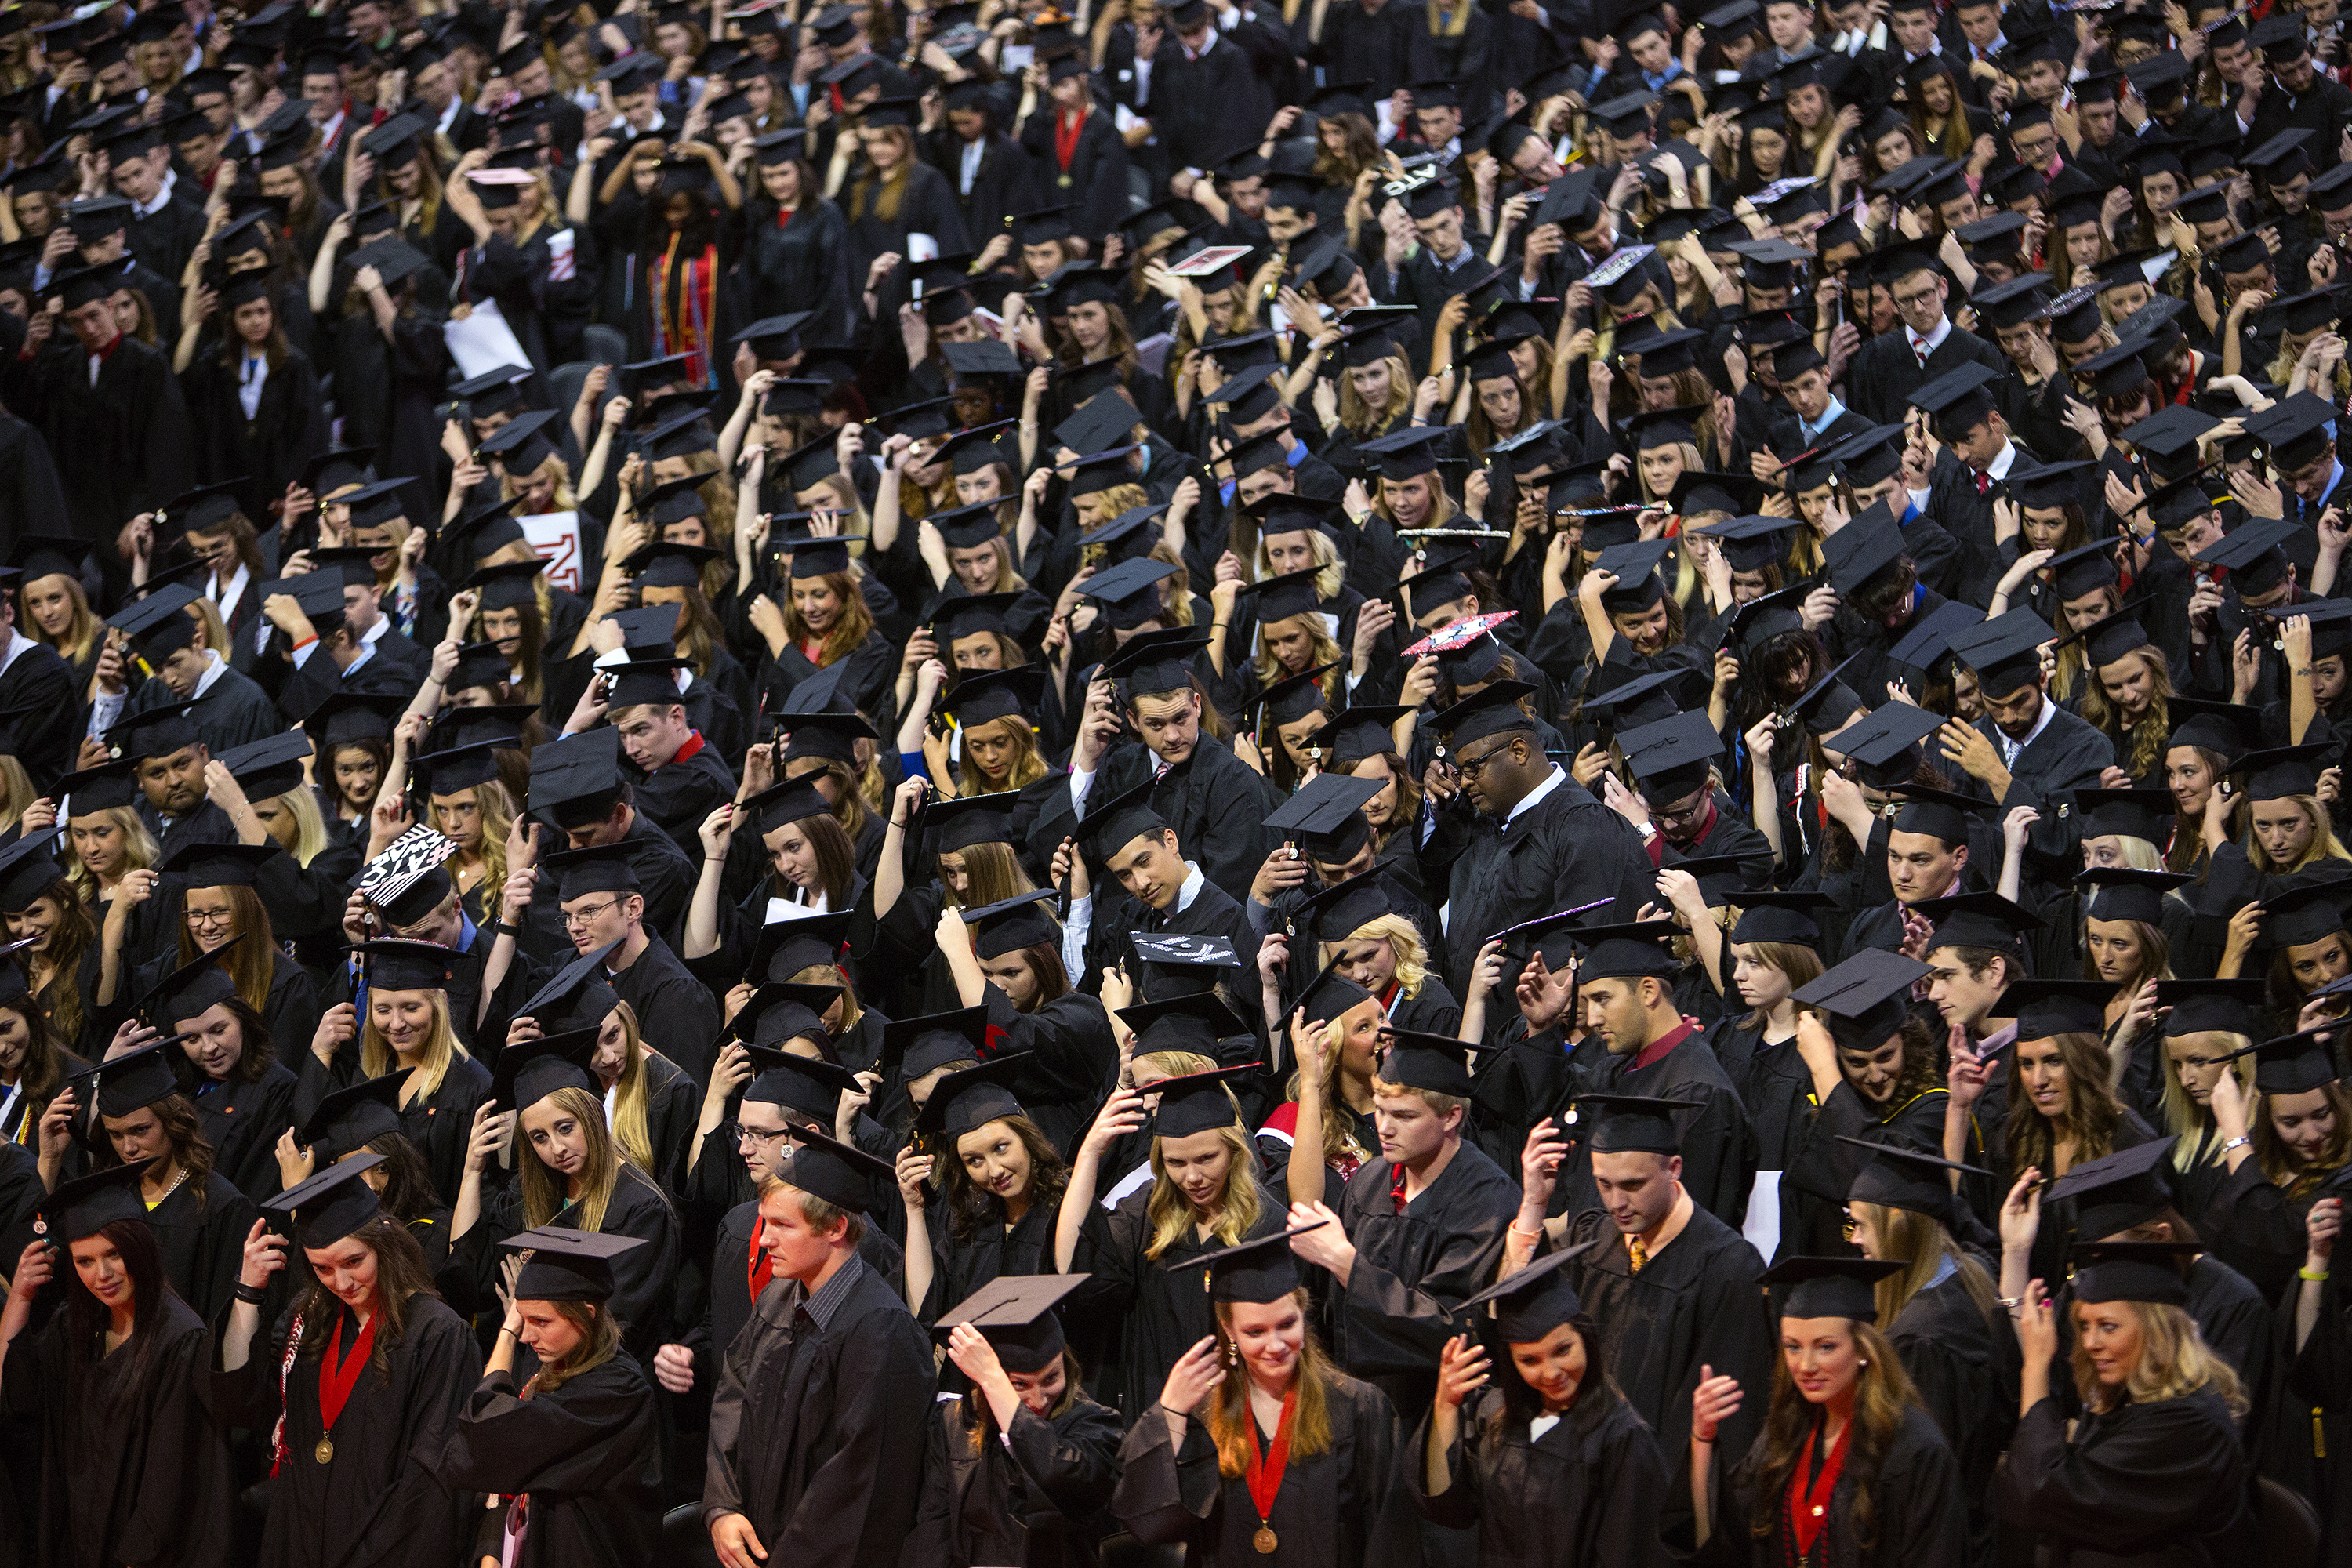 Students gather during graduation